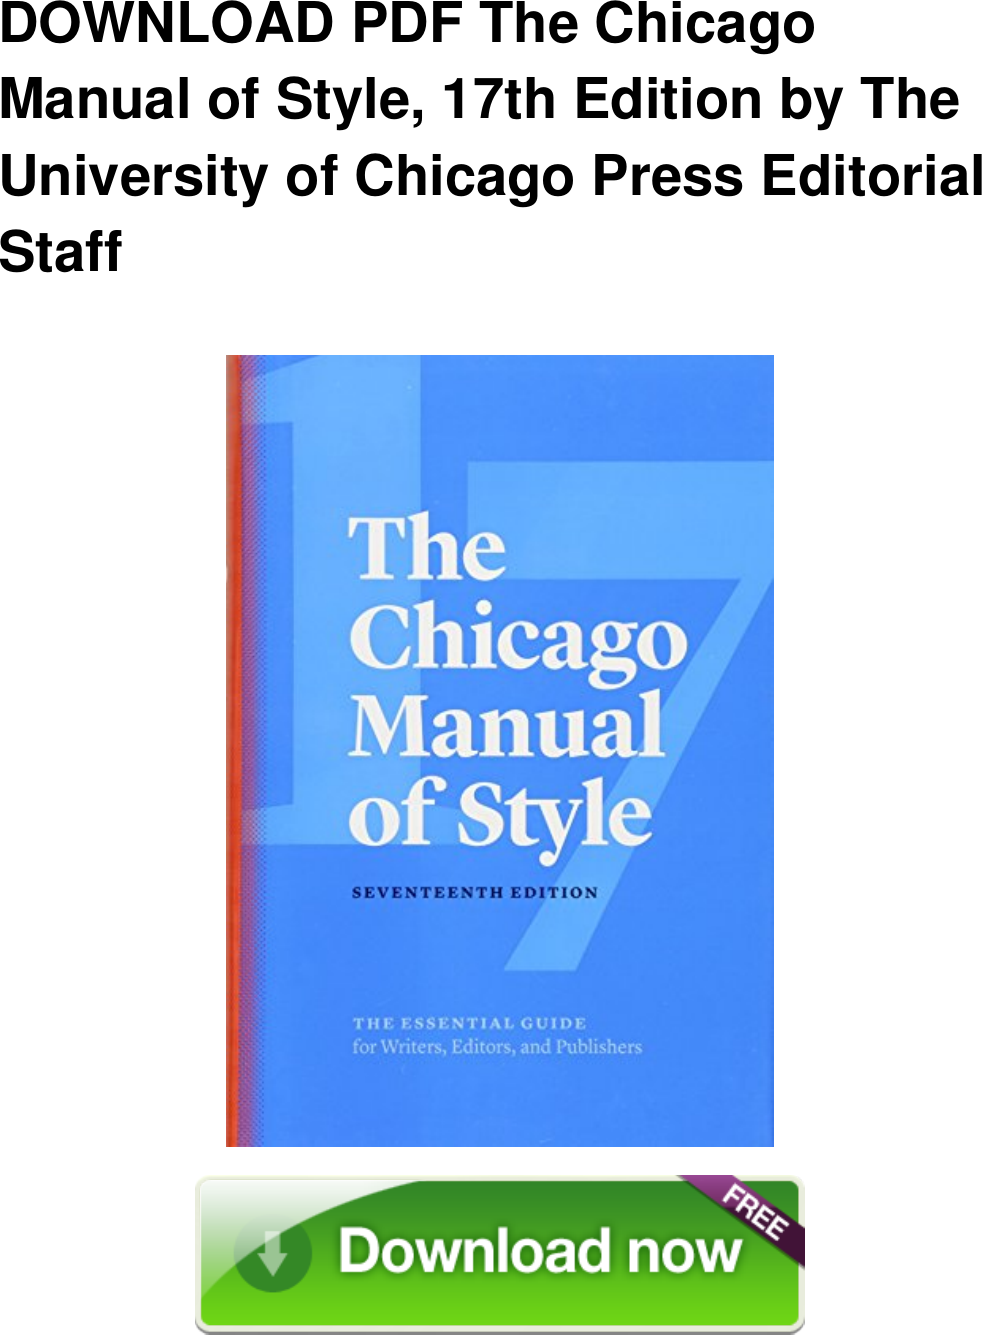 Page 1 of 3 - PDF The Chicago Manual Of Style, 17th Edition By University Press Editorial Staff Full-Book-The-Chicago-Manual-Of-Style-17th-Edition-UE427962